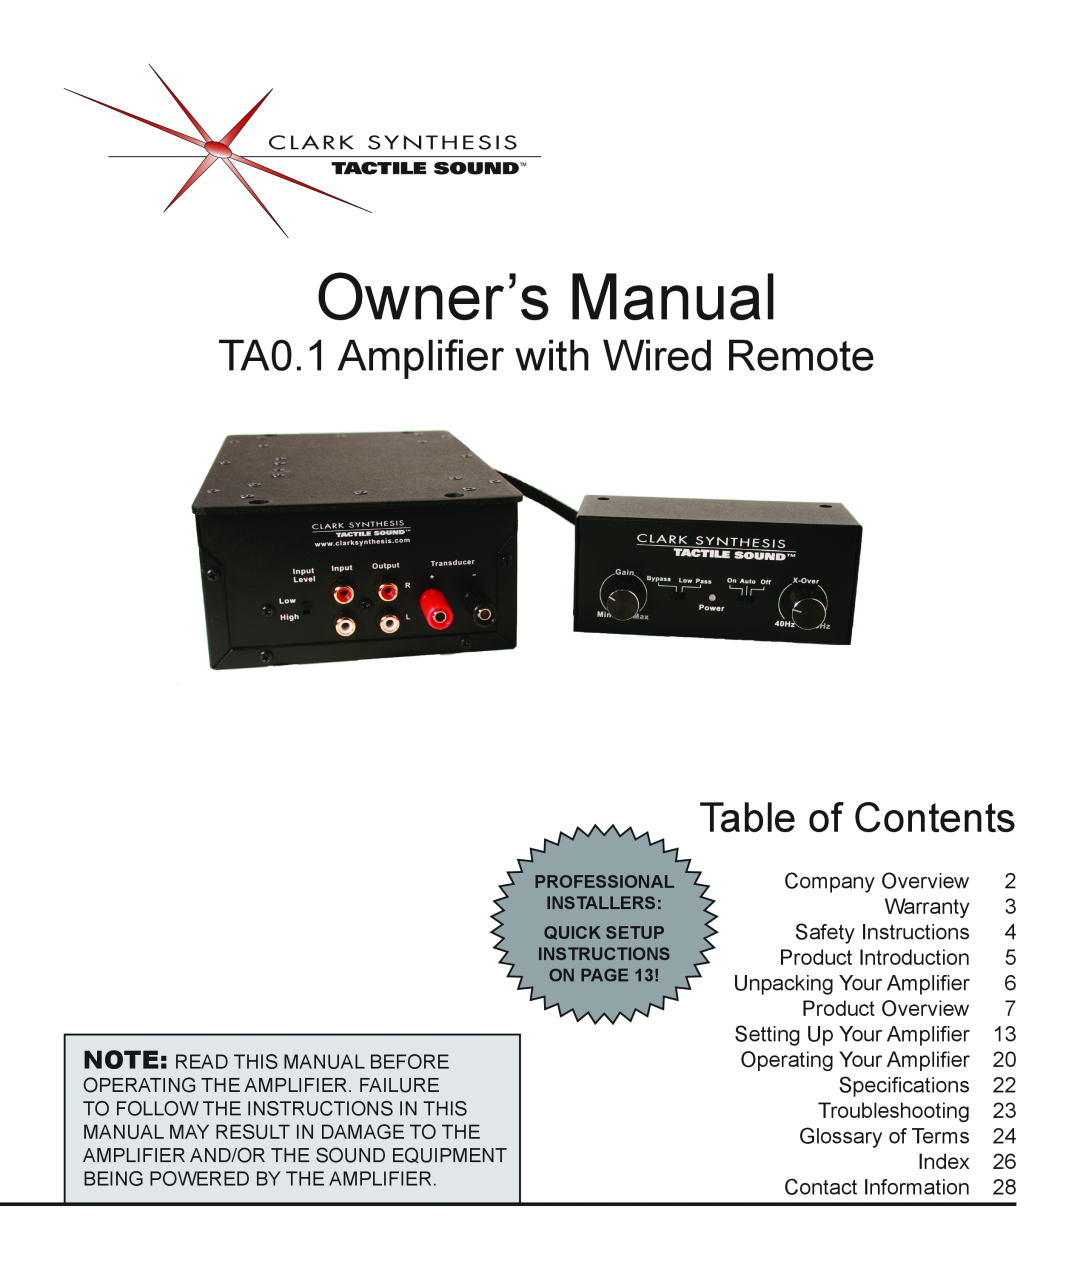 Clark Synthesis owner manual TA0.1 Amplifier with Wired Remote, Table of Contents 